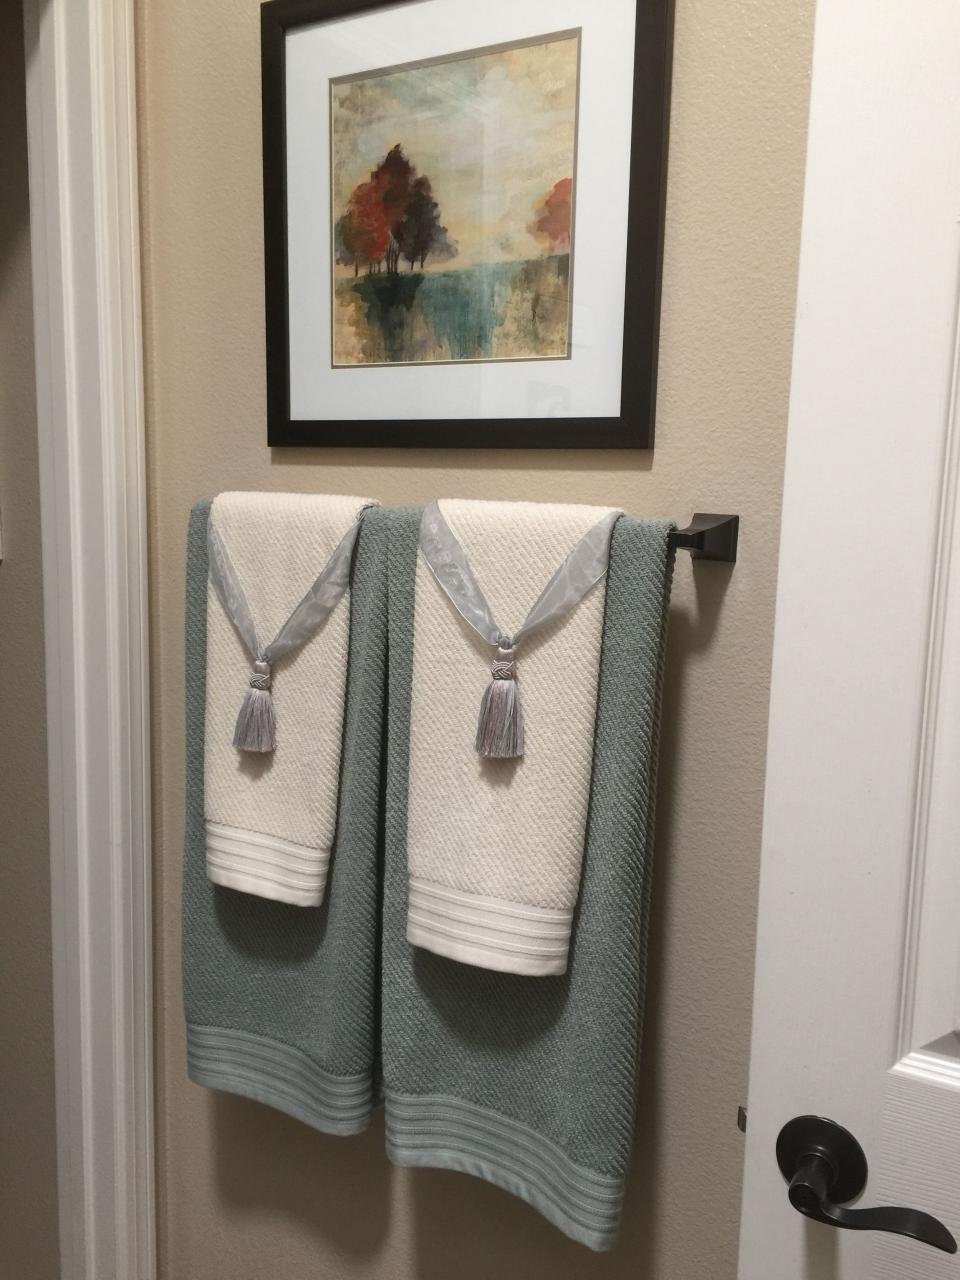 How To Decorate The Bathroom With Towels 15 Diy Pretty Towel